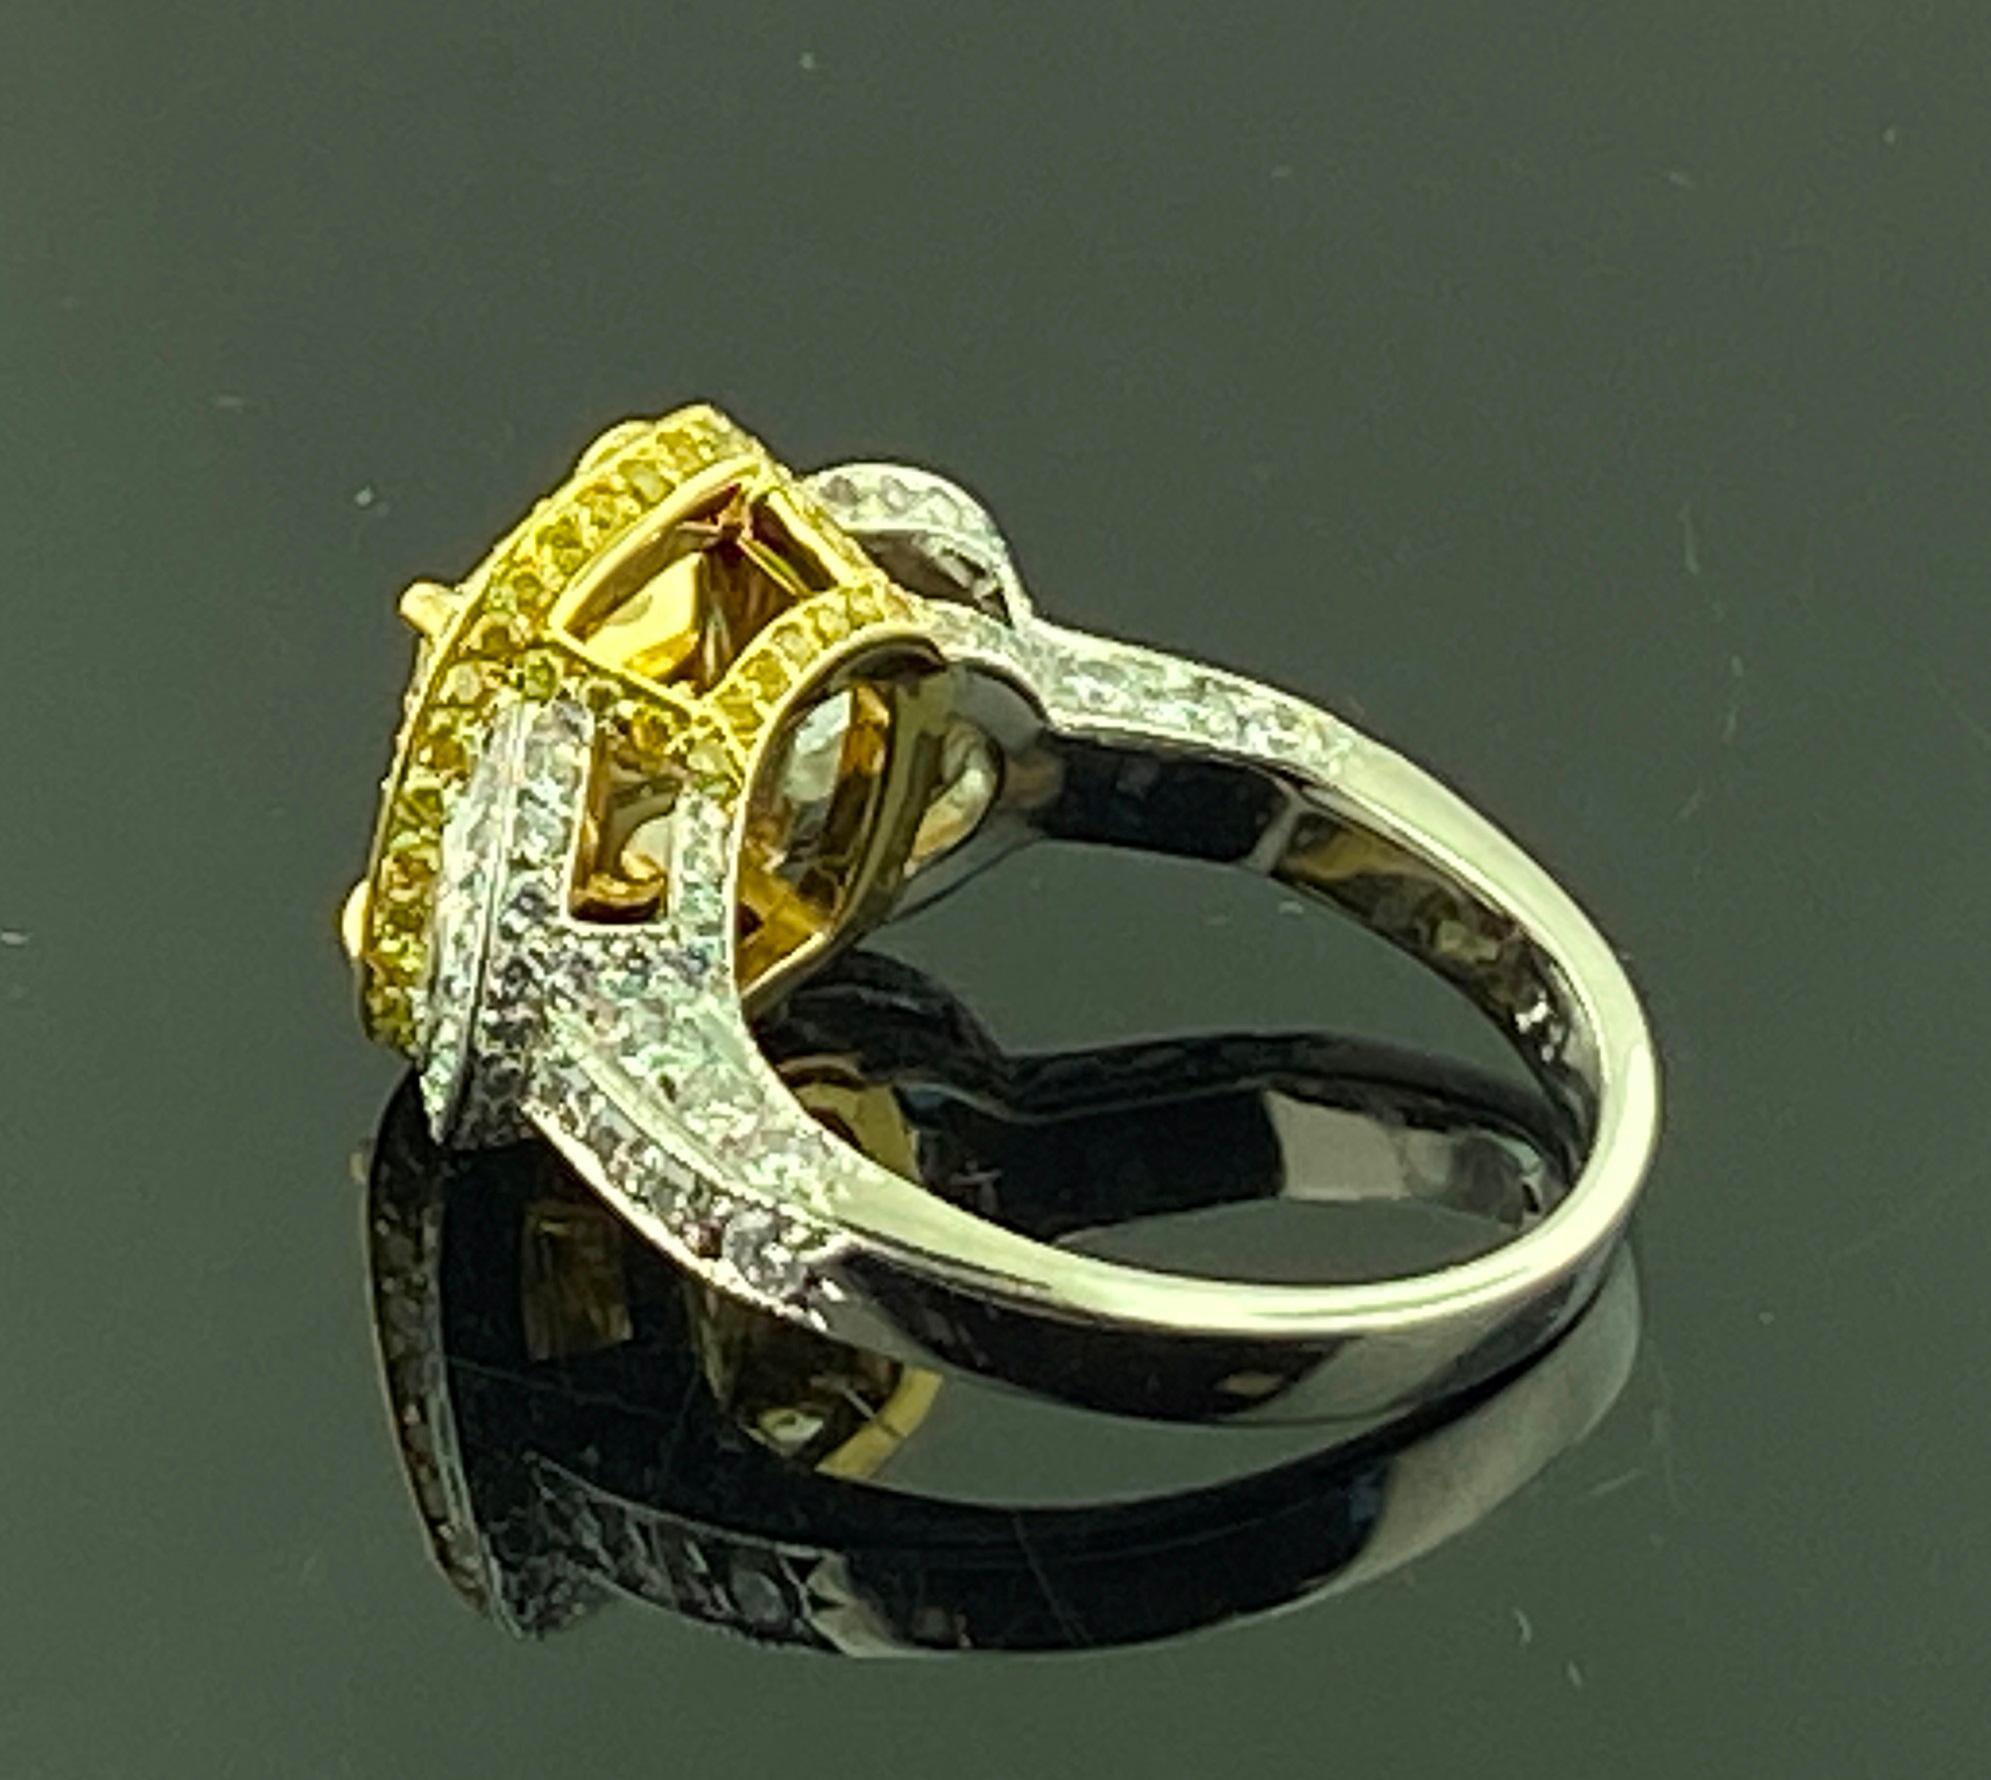 Platinum and 18 KT Yellow Gold 3.74 Ct Radiant Cut Fancy Yellow Diamond Ring In Excellent Condition For Sale In Palm Desert, CA